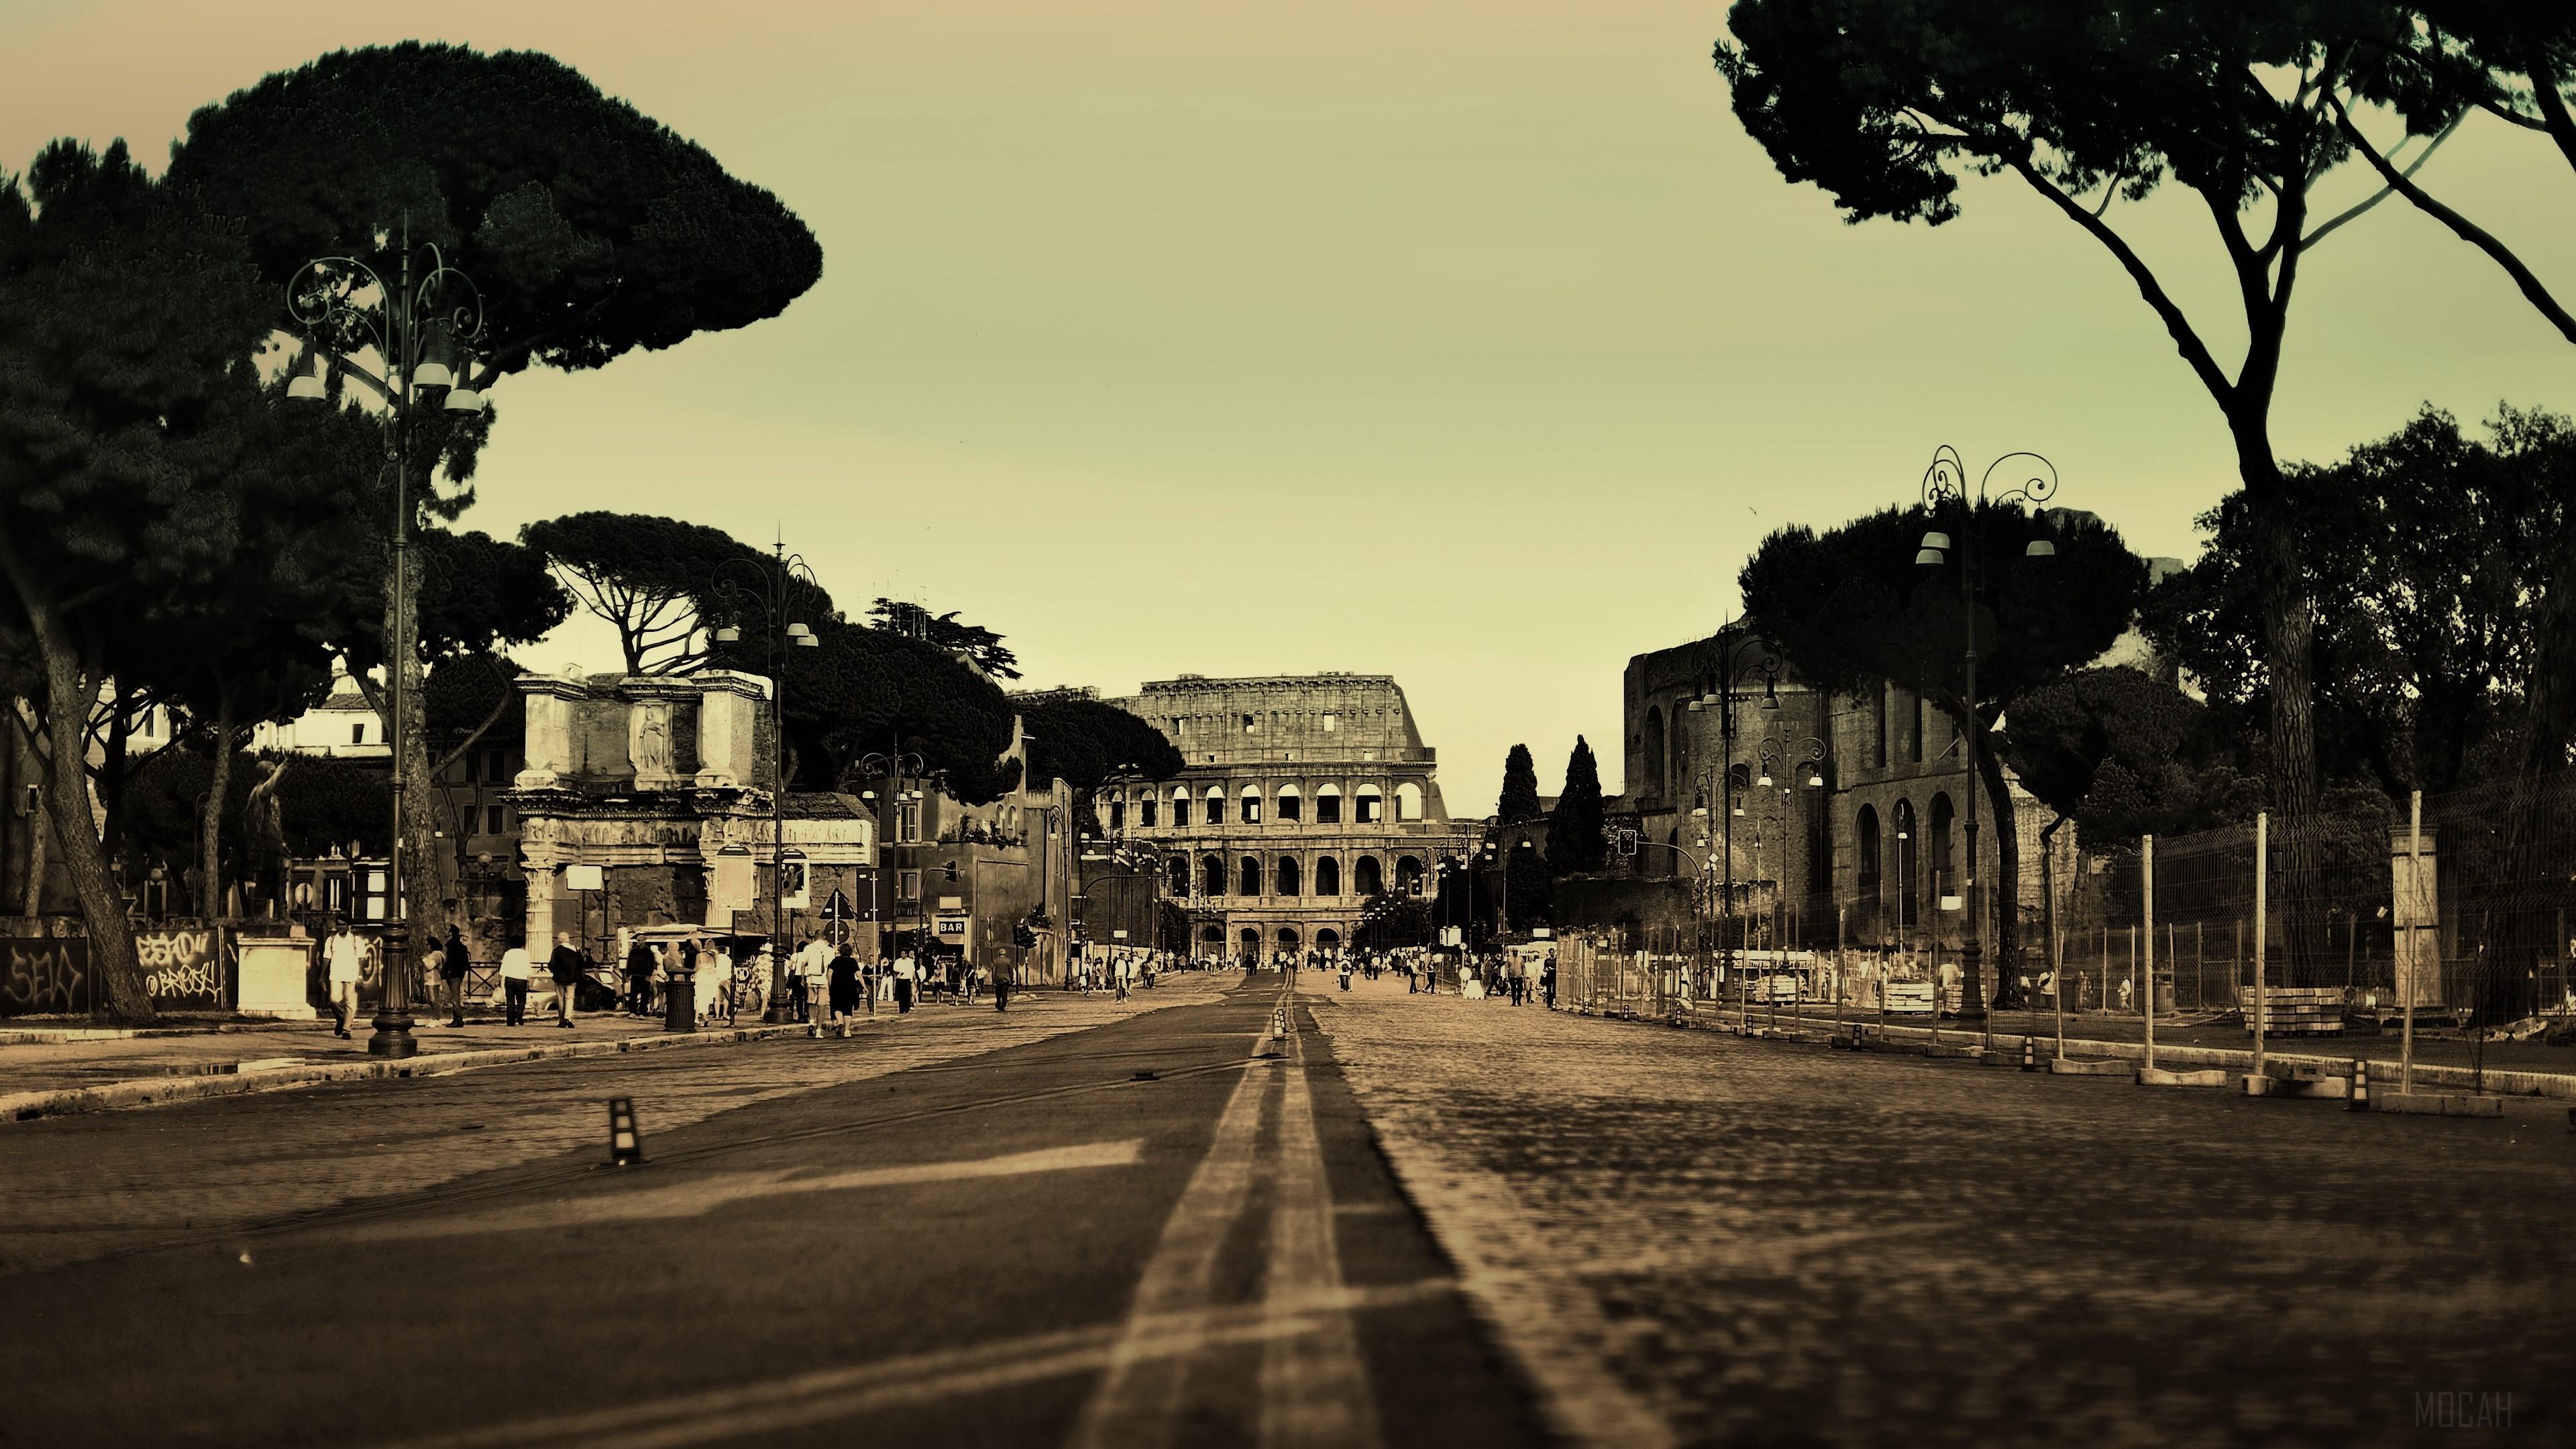 HD wallpaper, Street, Trees 4K, City, Road, Colosseum, Rome, Italy, People